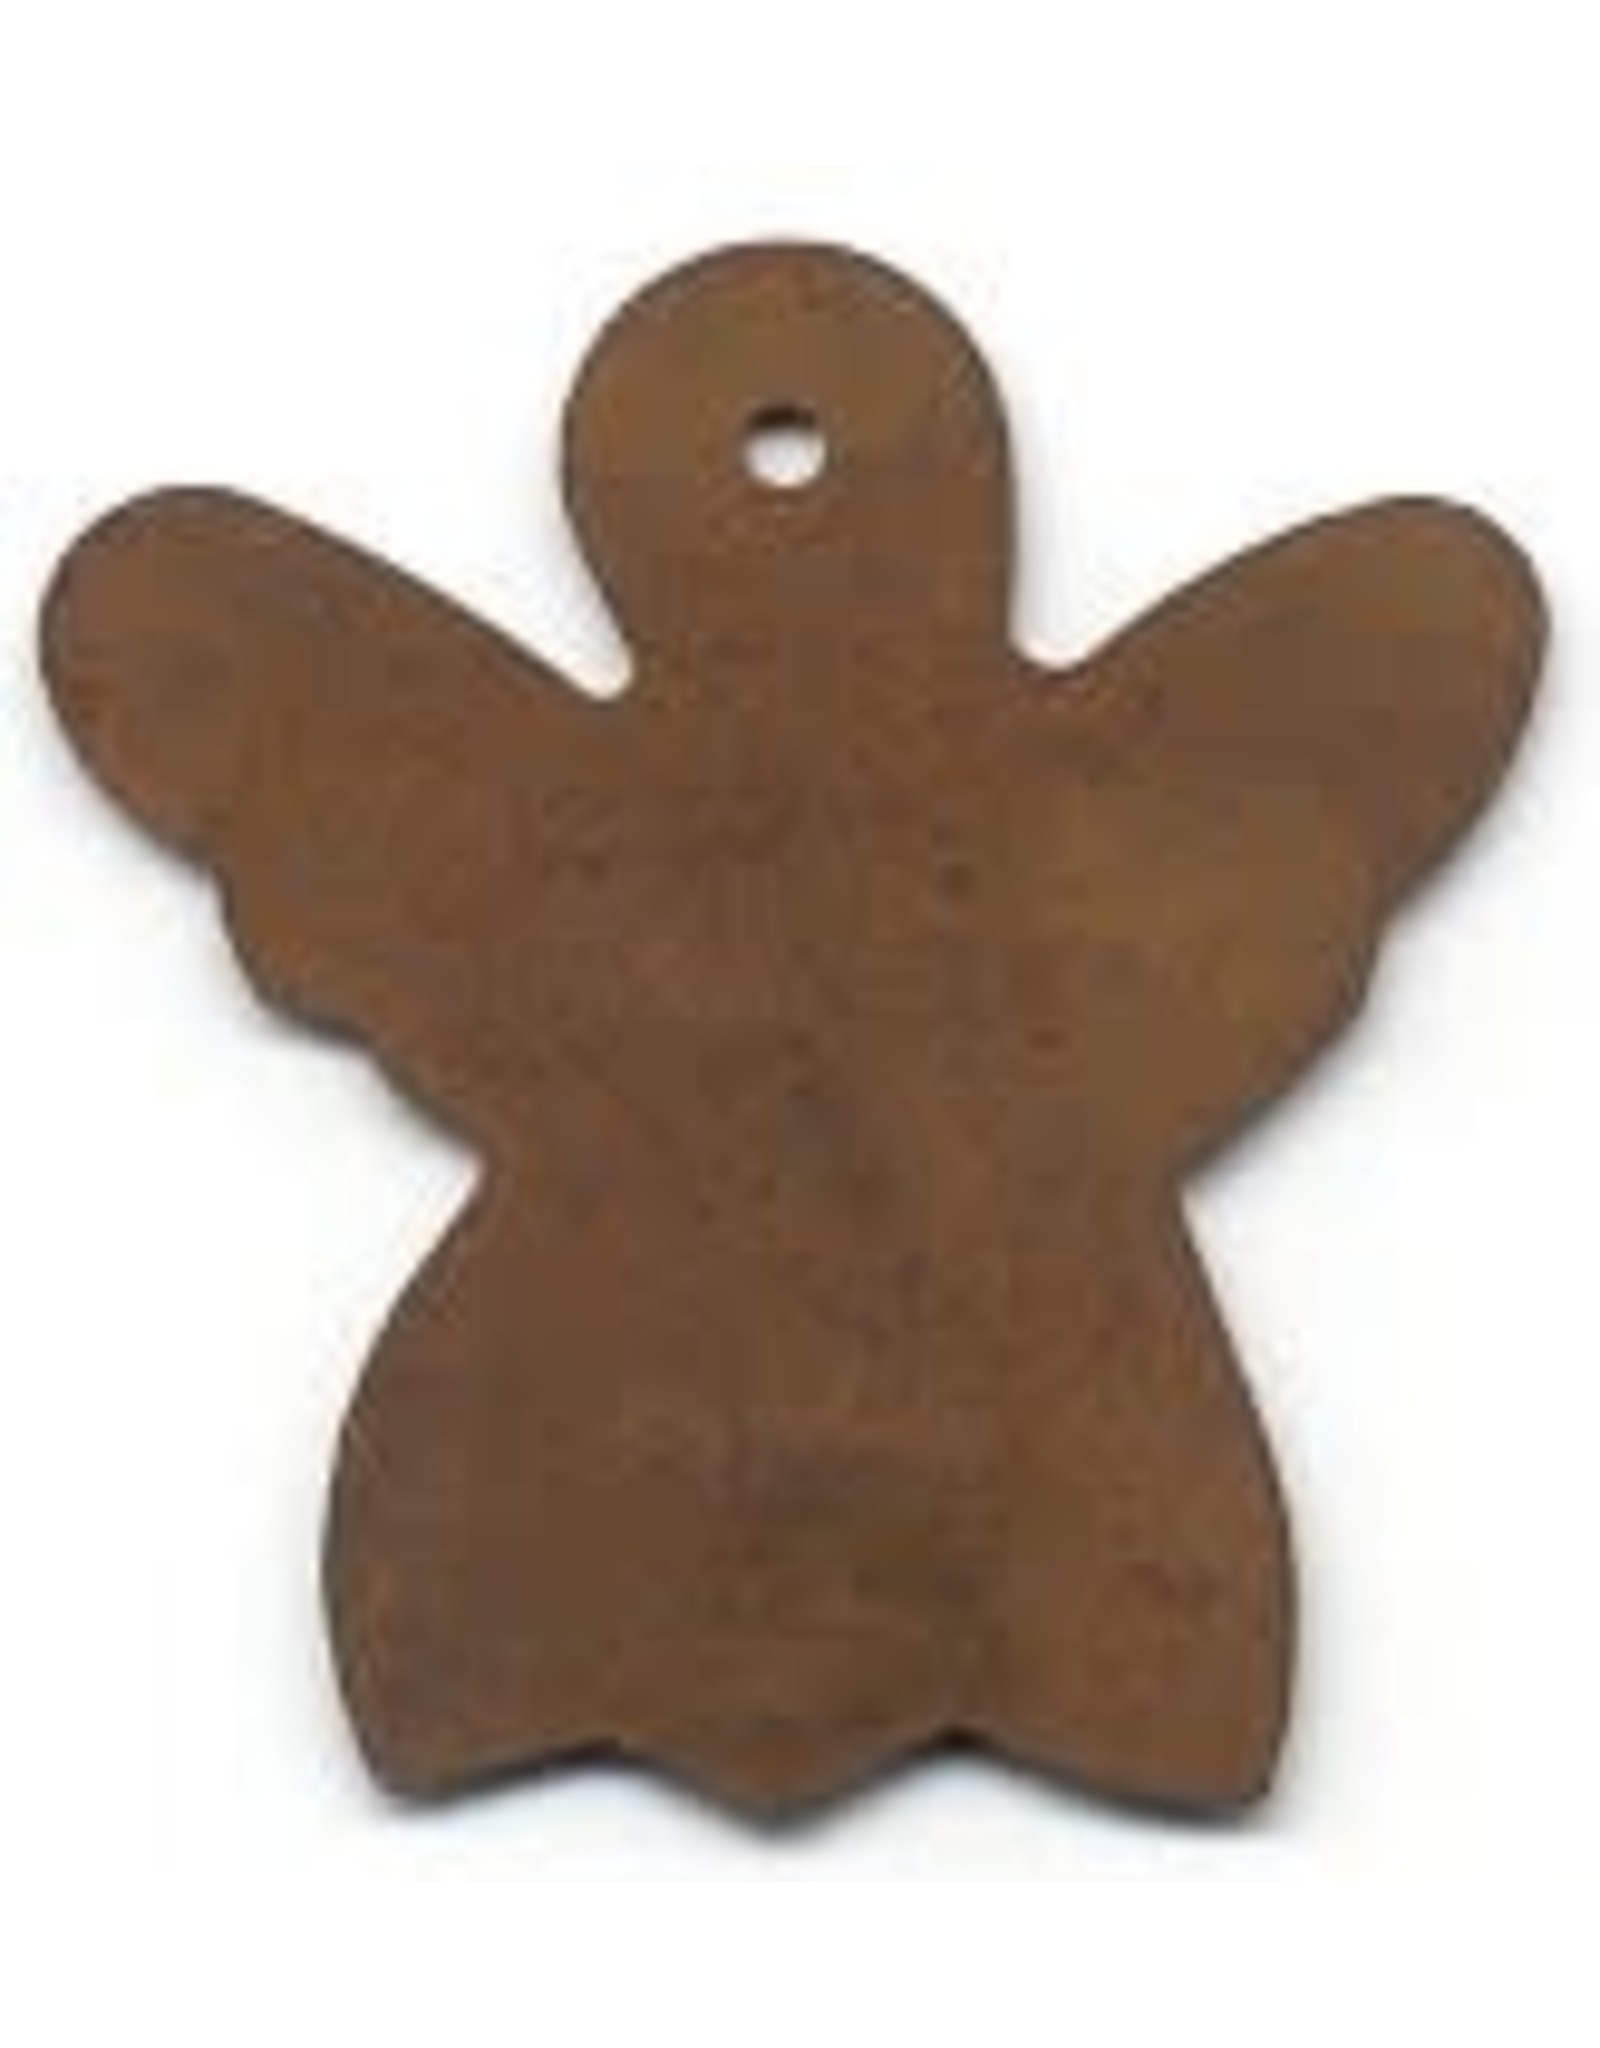 RUSTY TIN ANGEL 7/8" (WITH HOLE) PACKAGED 12